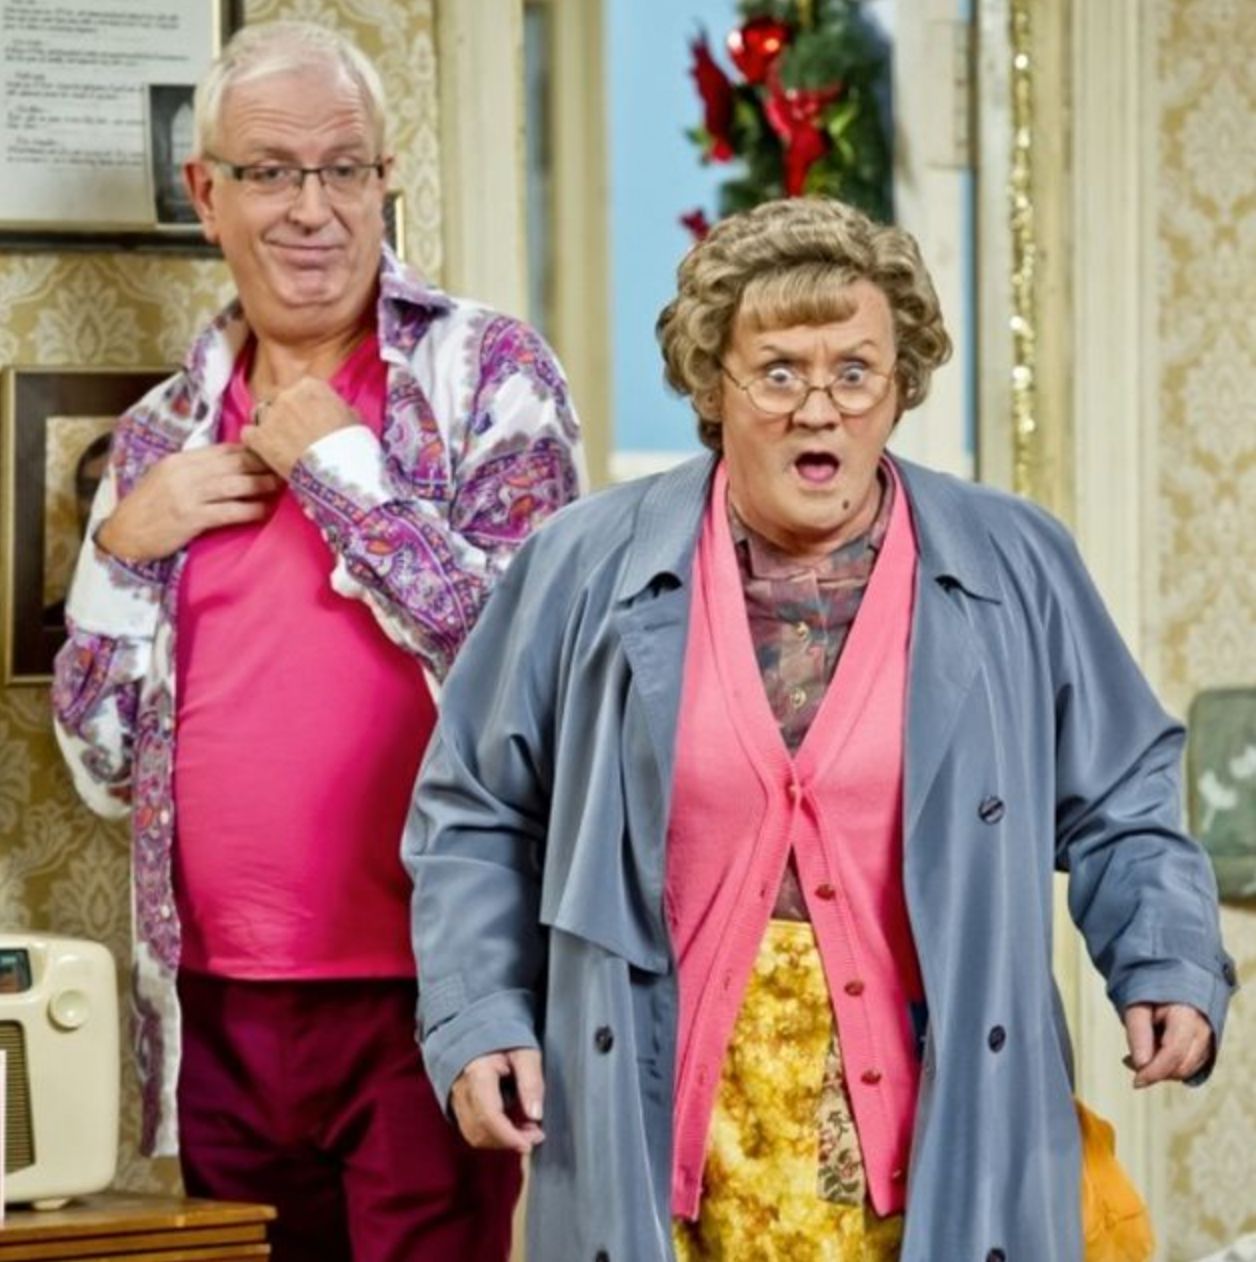 Mrs. Brown and her gay son Rory, played by Rory Cowan until 2017.